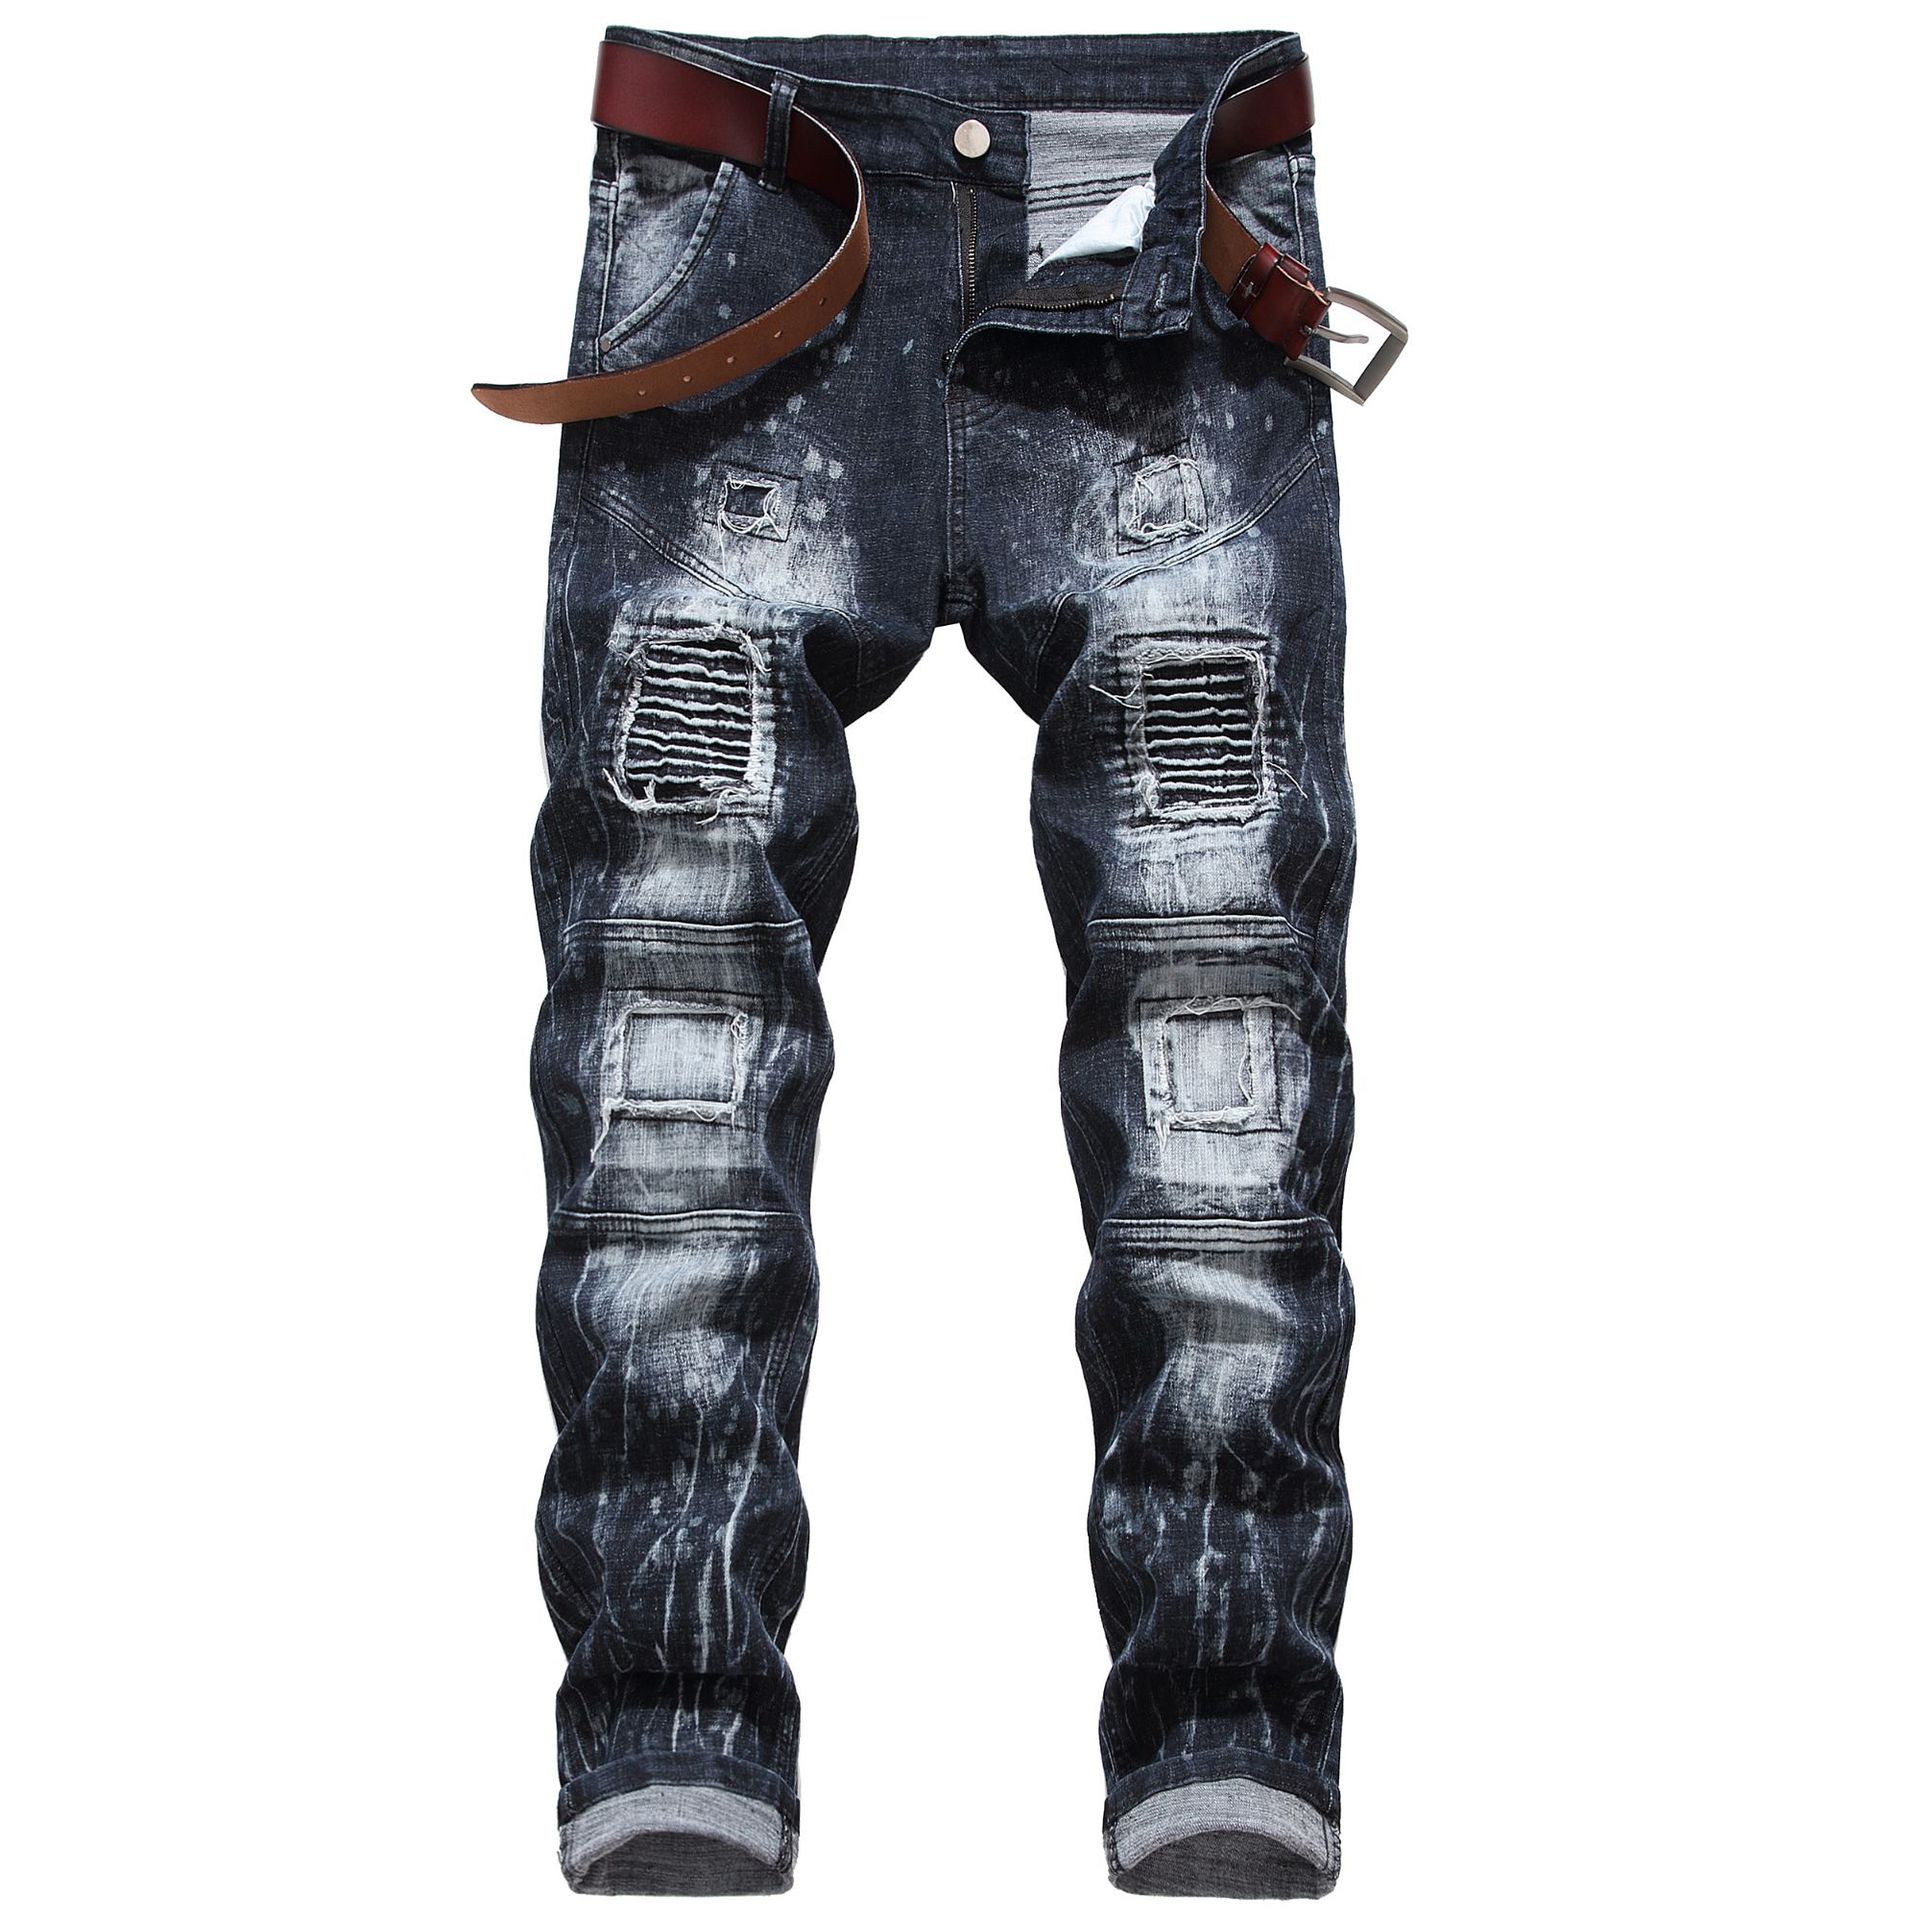   Cross-Border Supply Men's Stretch Black Jeans Motorcycle Miscellaneous Stitching Men's Jeans